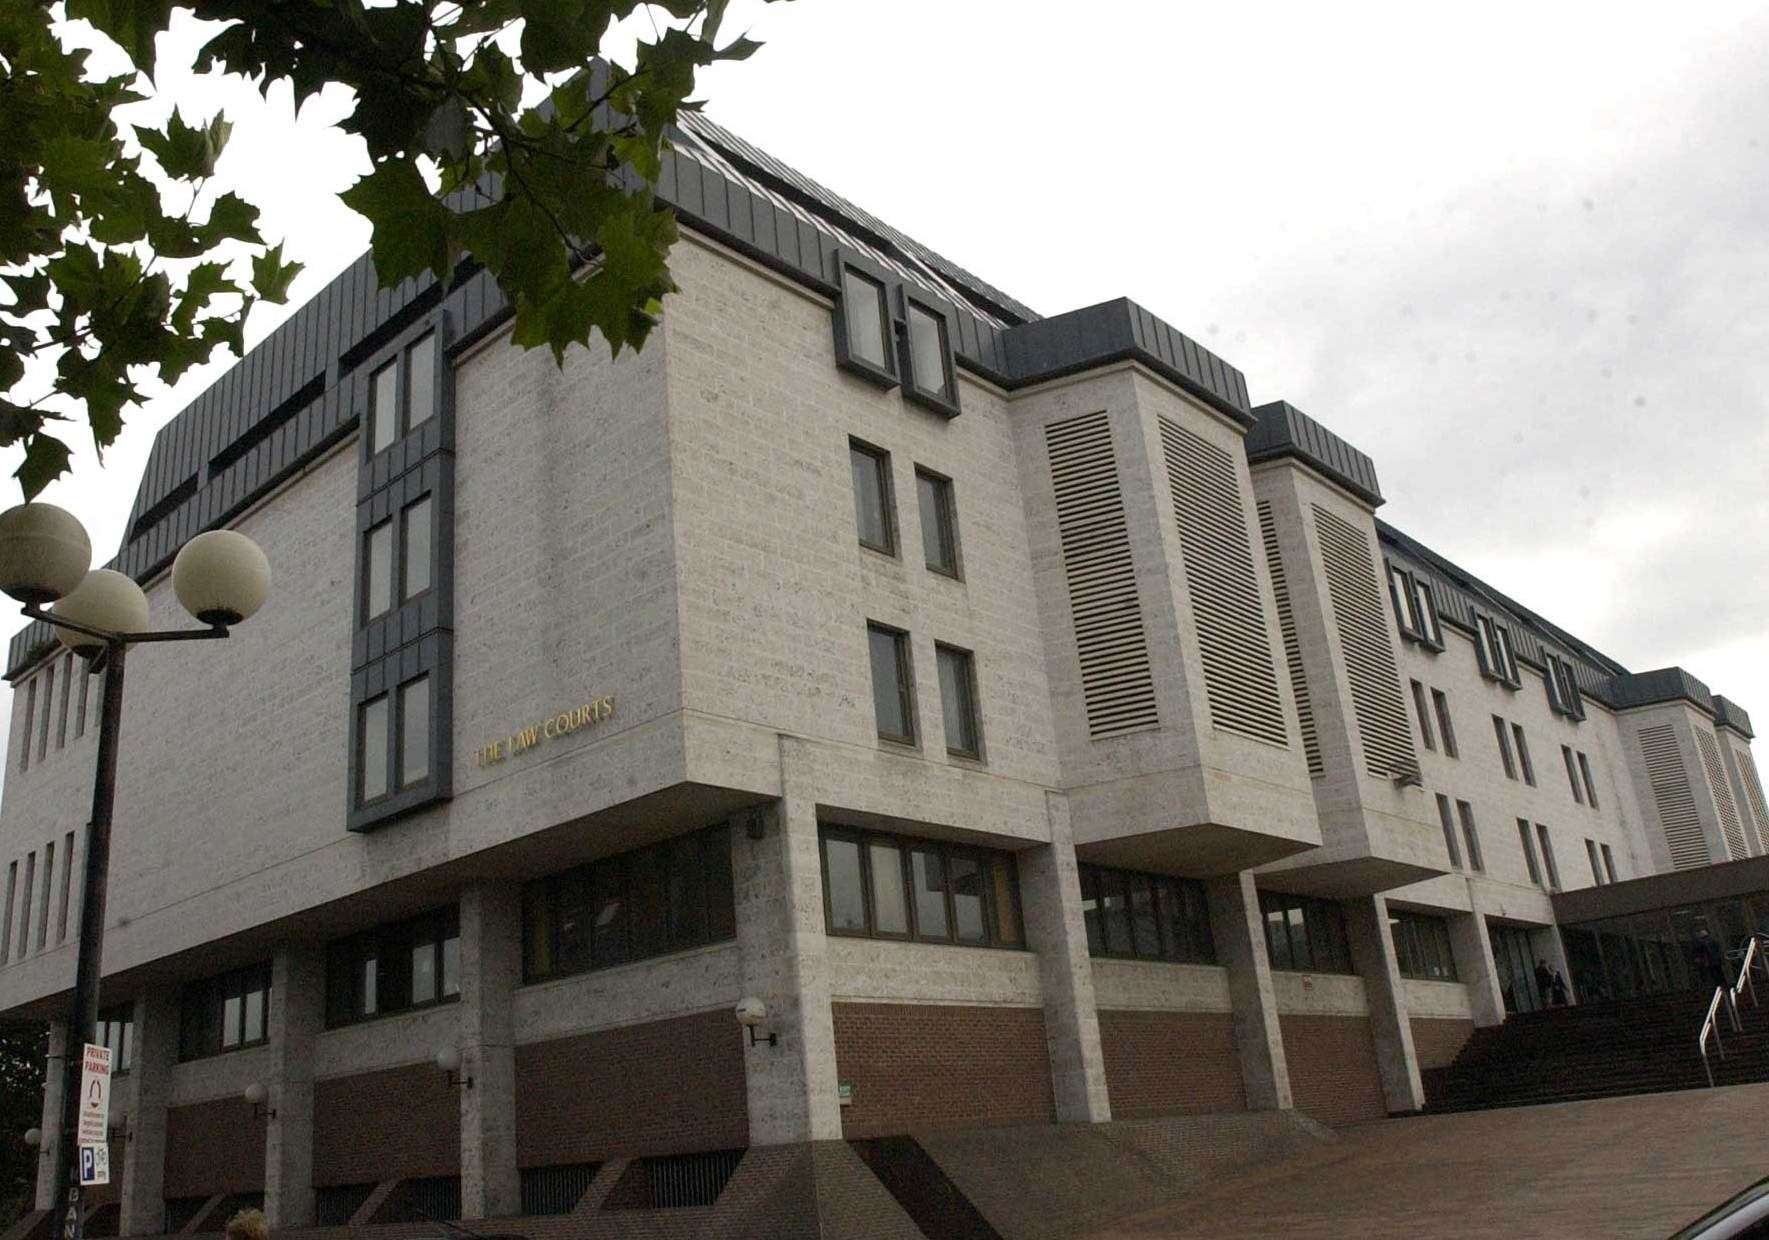 Finch was jailed at Maidstone Crown Court in 2011